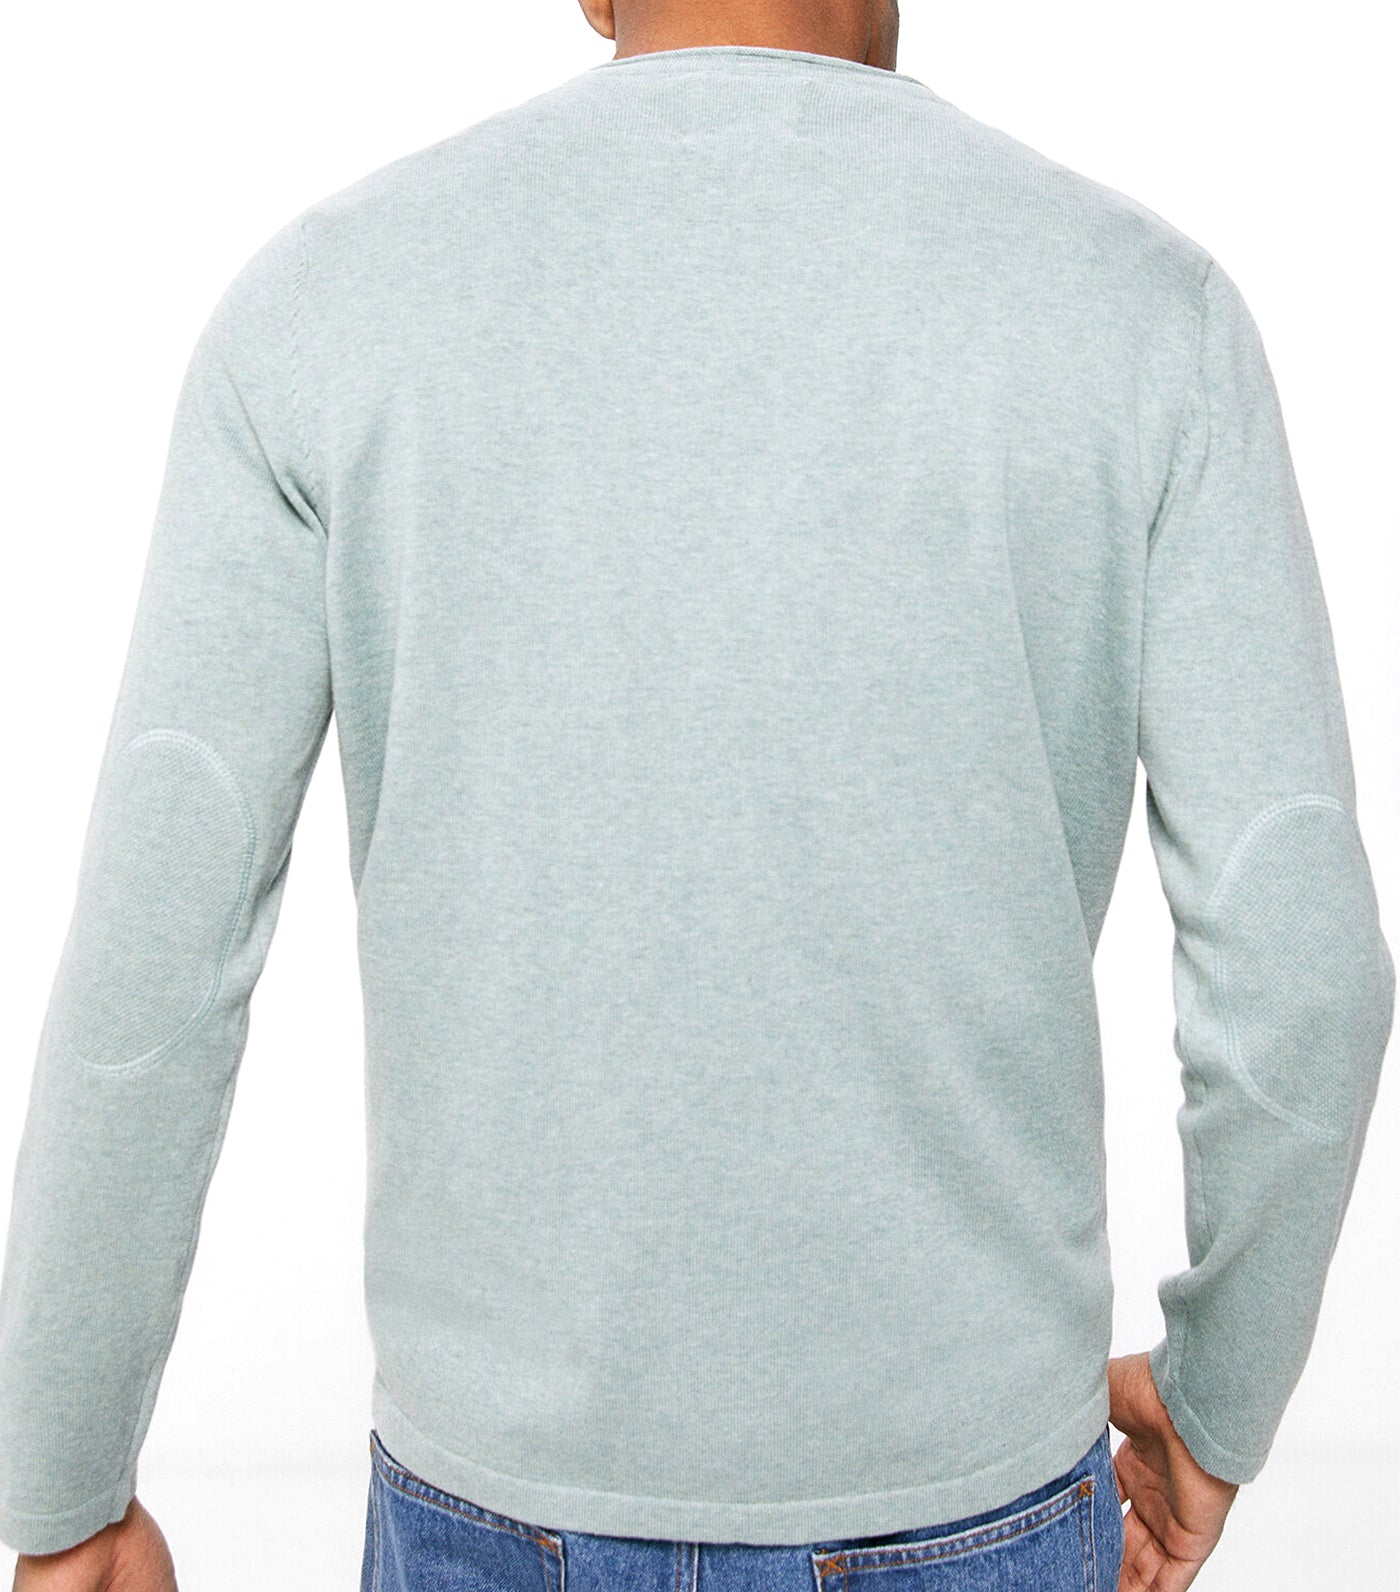 Basic Jumper with Elbow Pads Teal